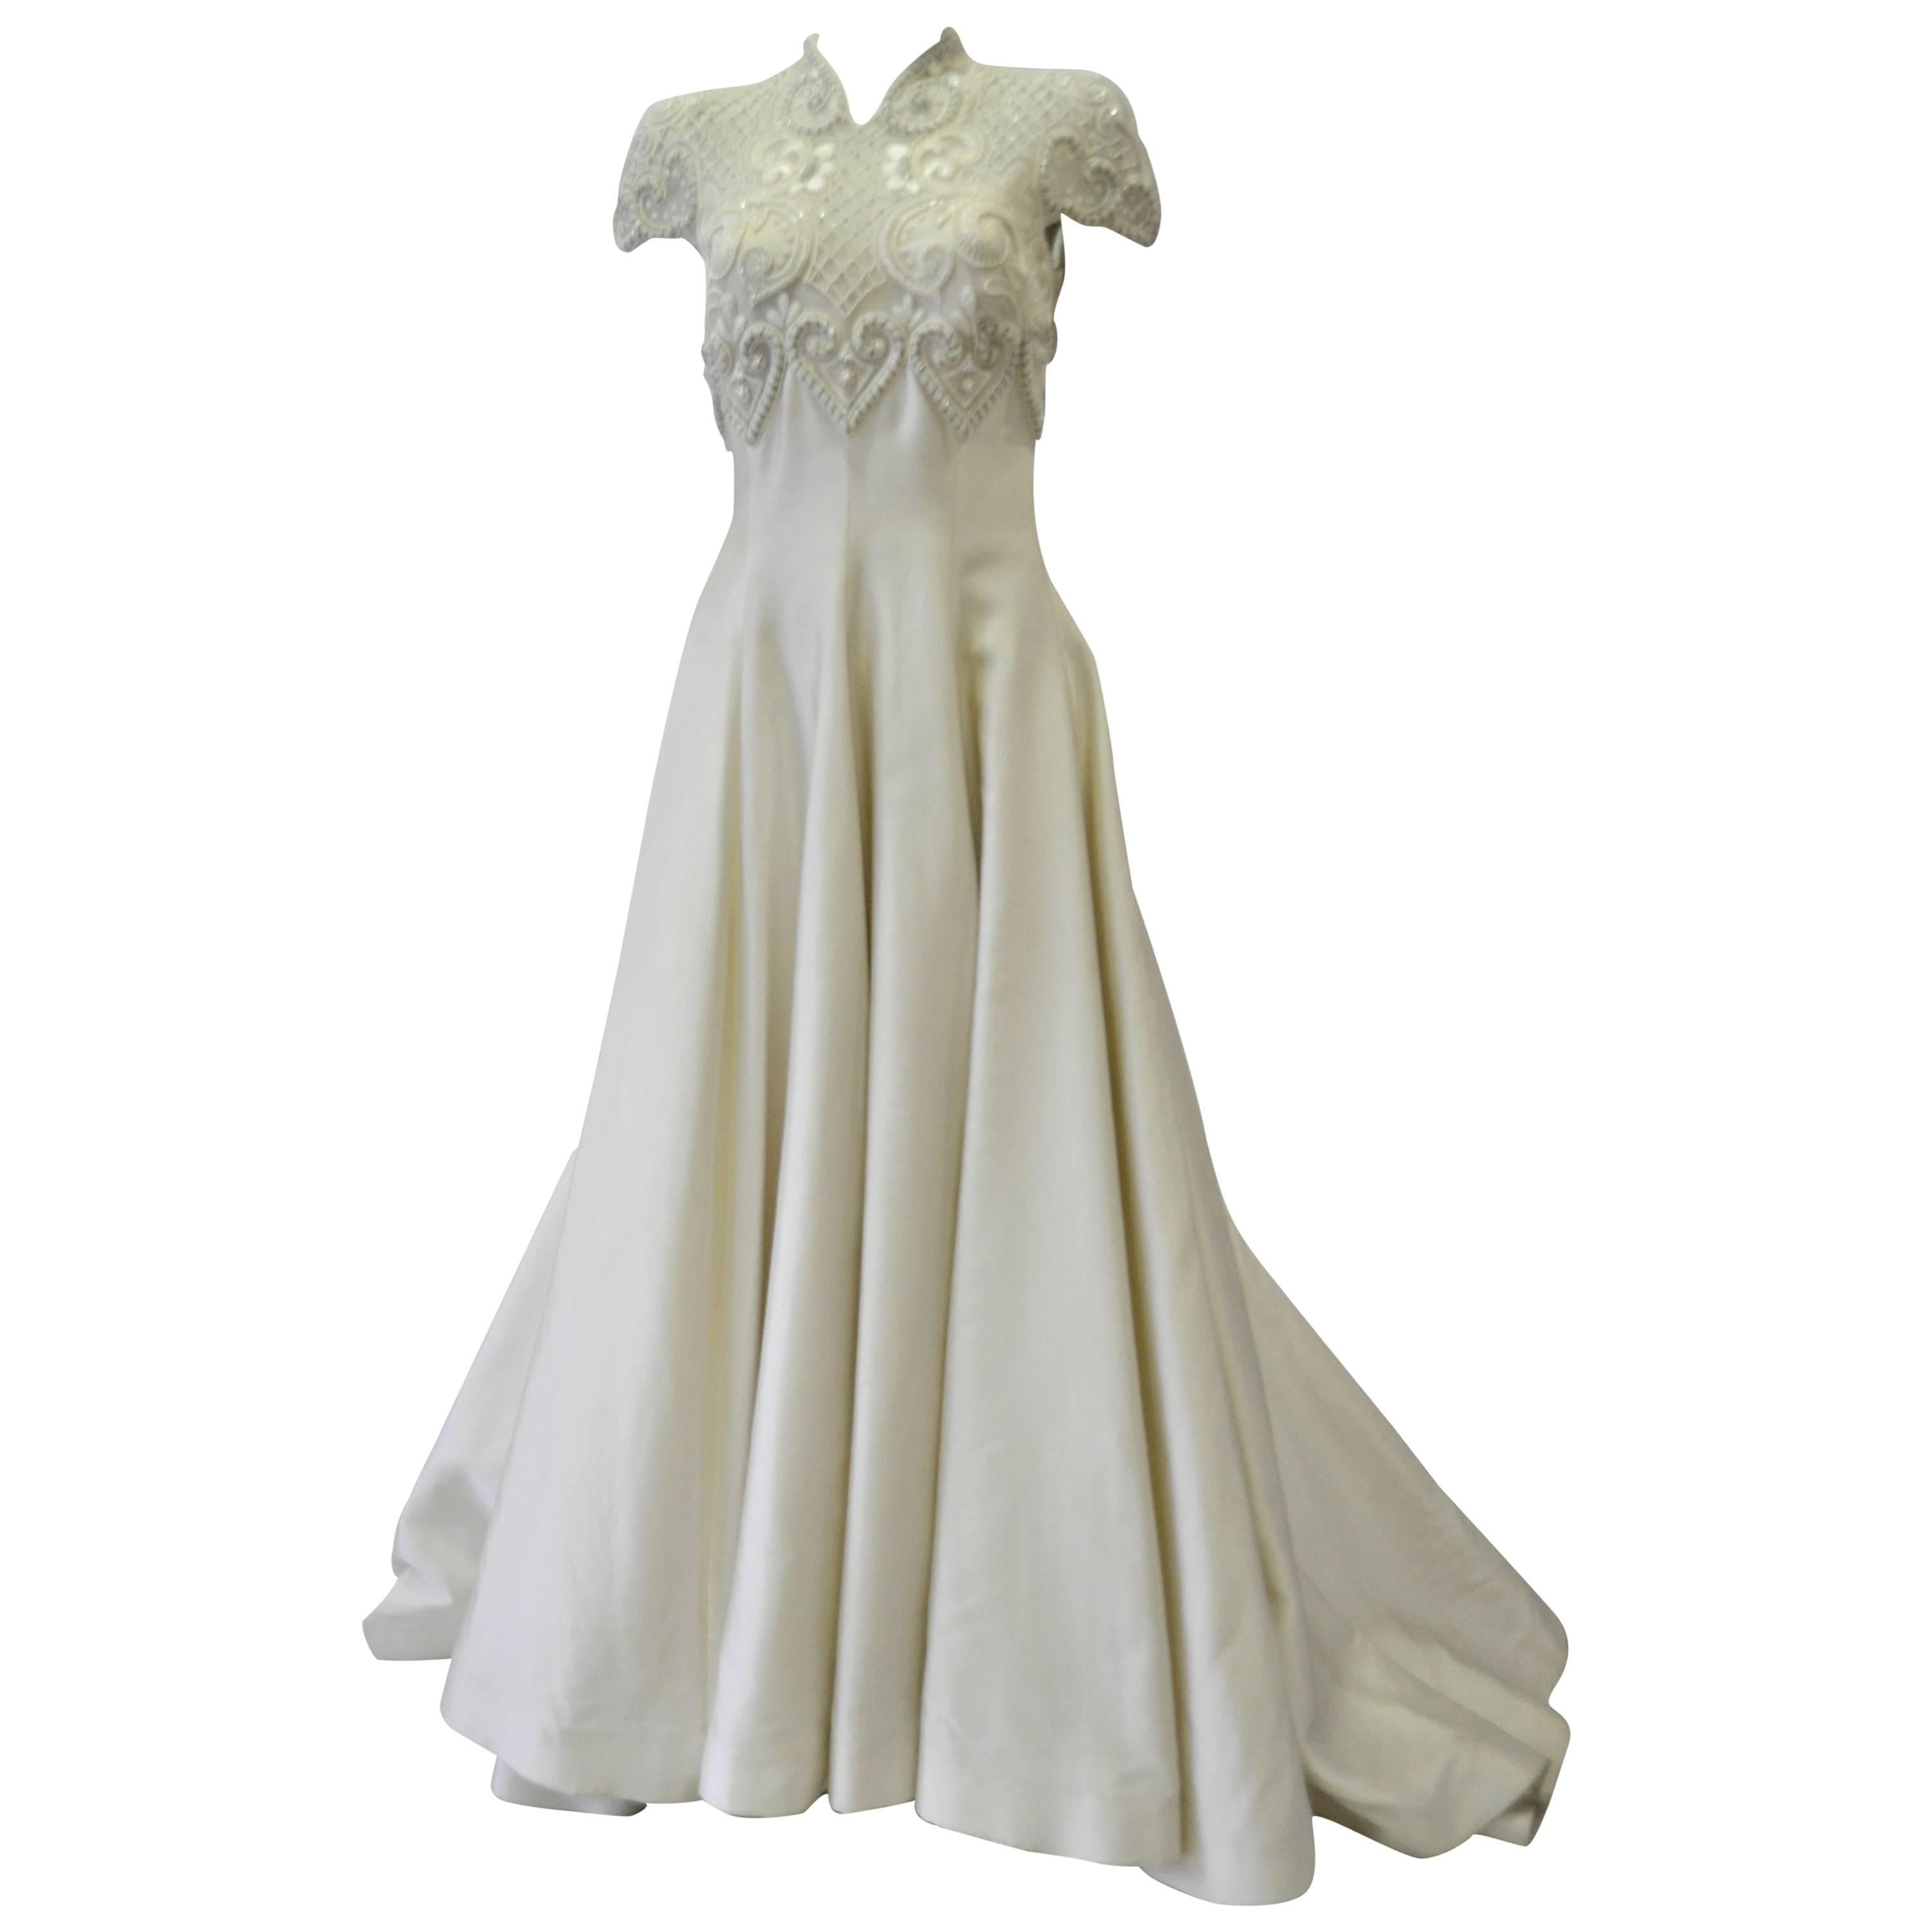 Important Pino Lancetti Hand Embroidered Duchess Satin Wedding Gown For Sale